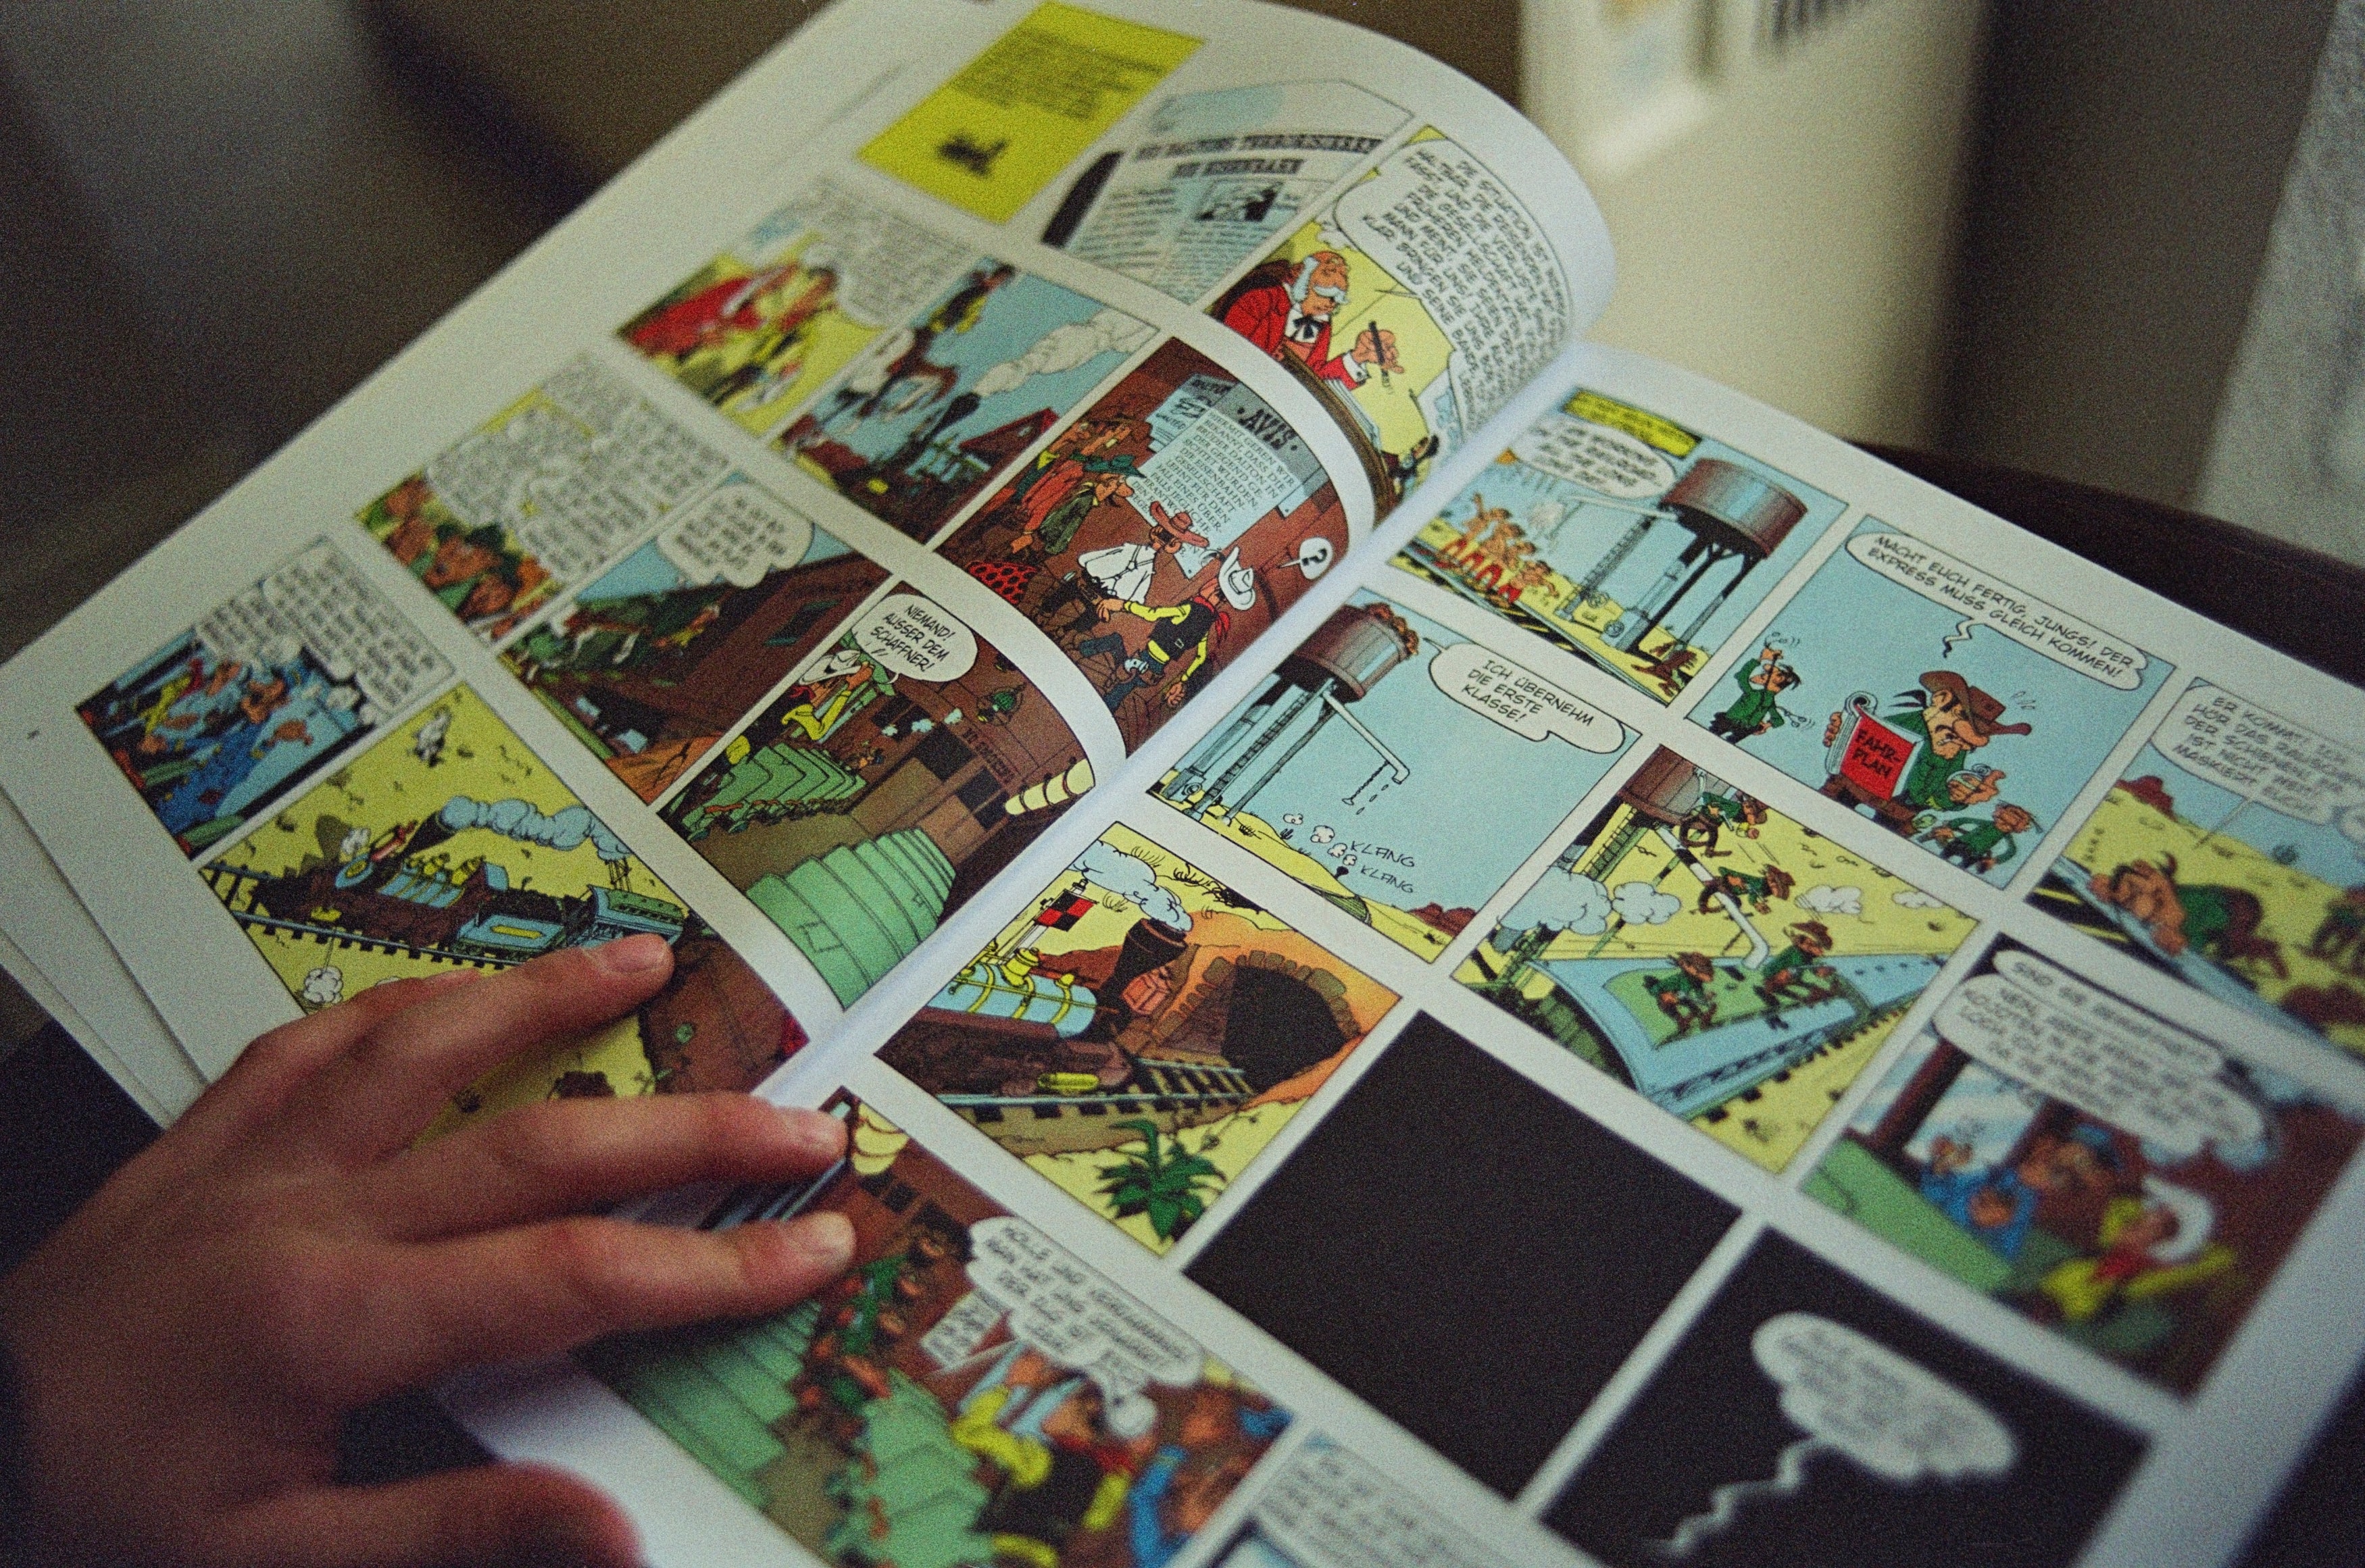 Open comic book with color illustrations